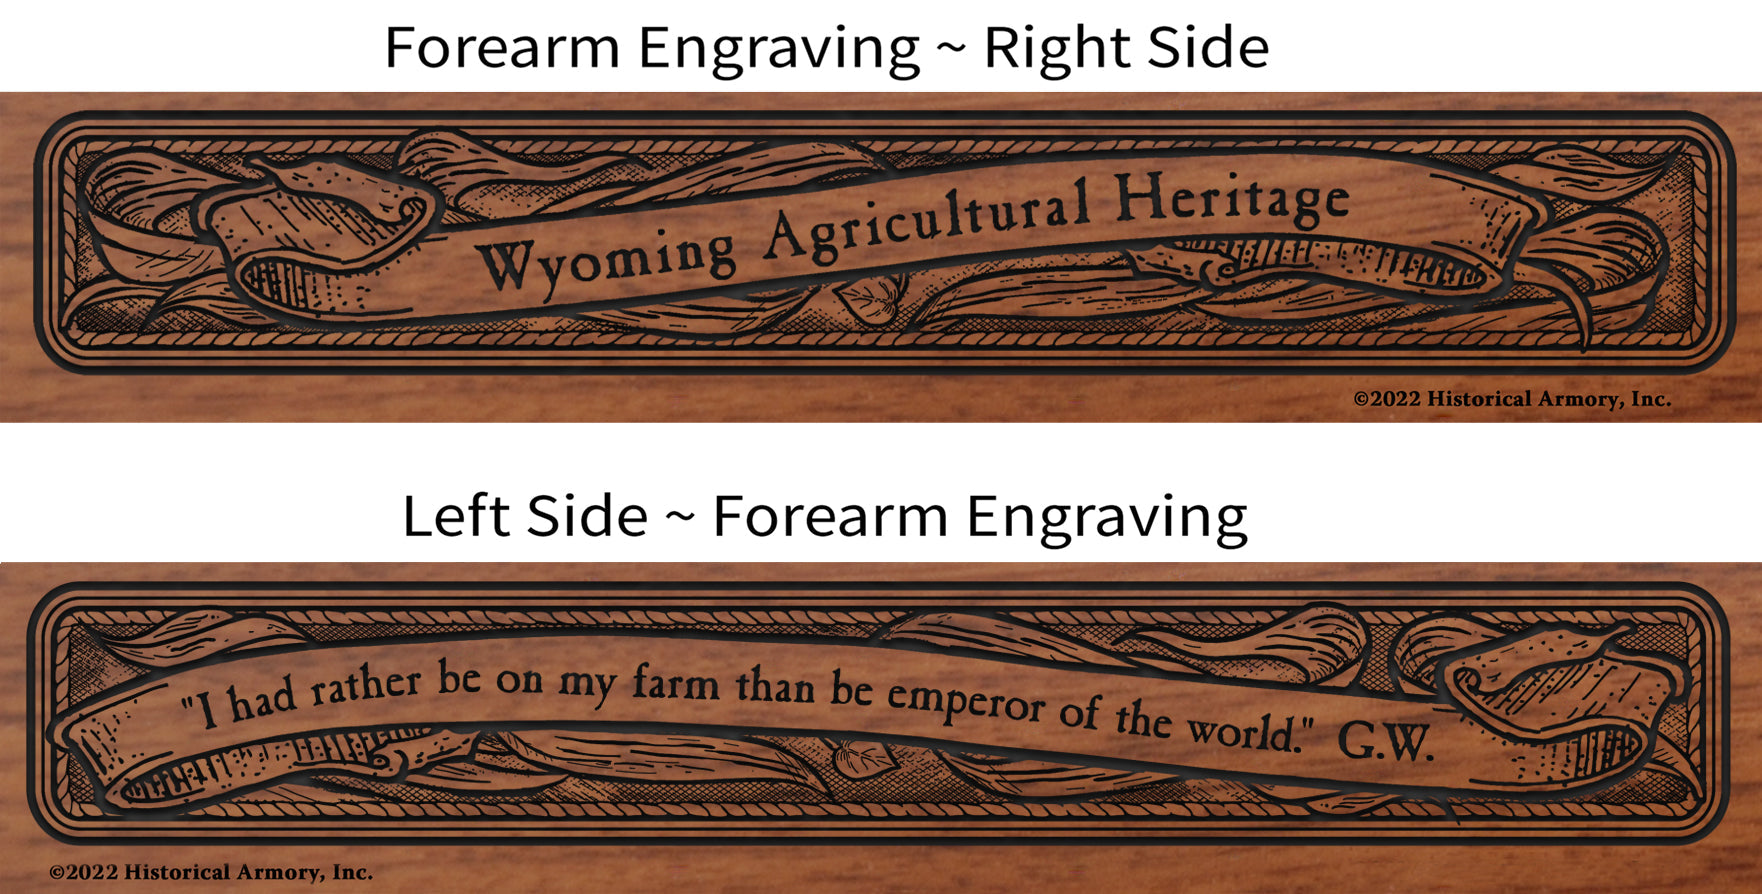 Wyoming Agricultural Heritage Engraved Rifle Forearm